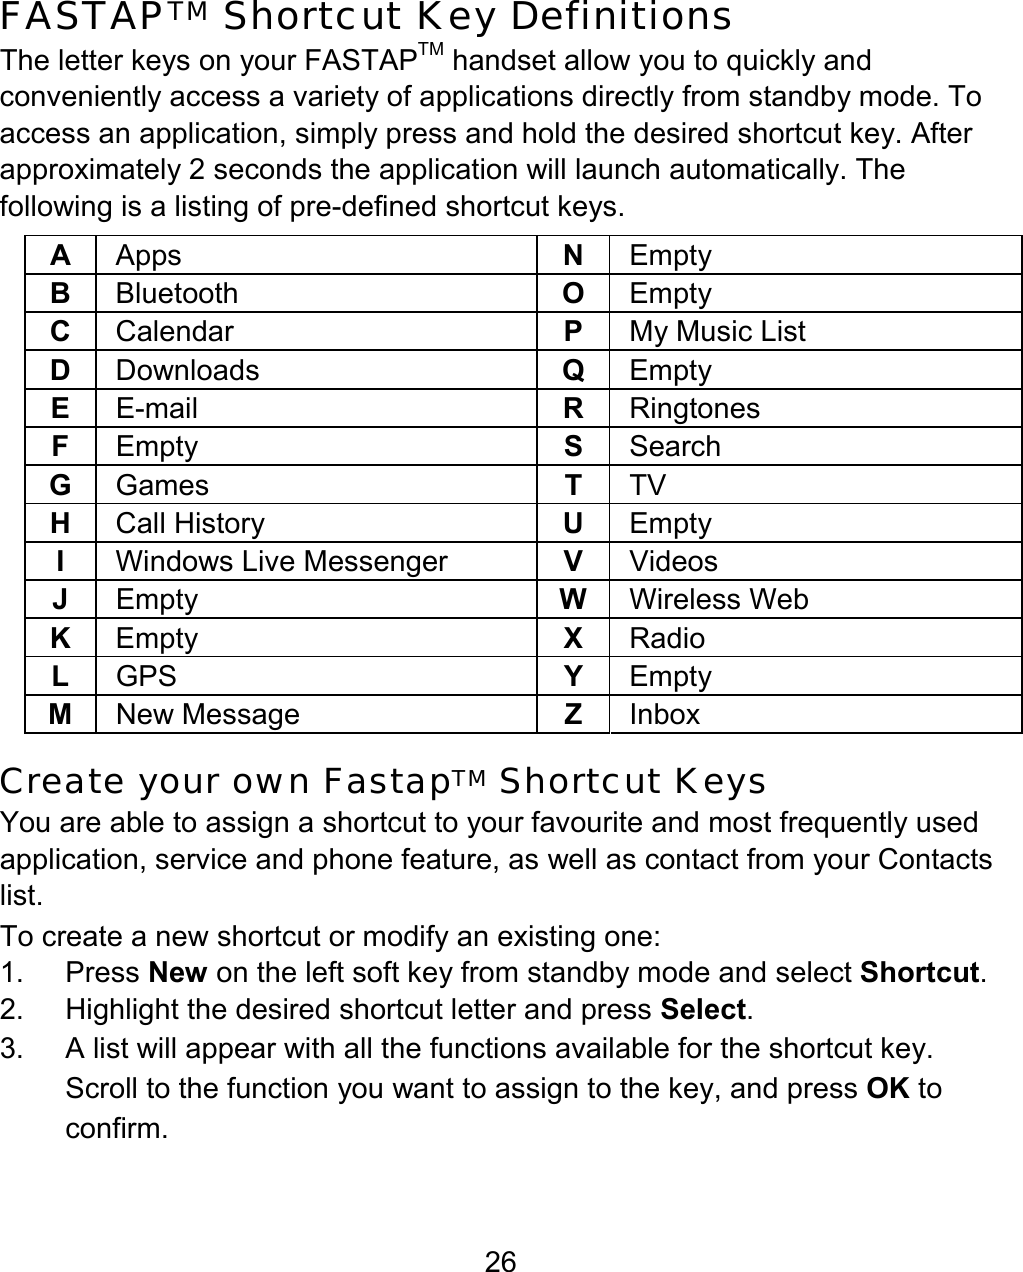 26 FASTAPTM Shortcut Key Definitions The letter keys on your FASTAPTM handset allow you to quickly and conveniently access a variety of applications directly from standby mode. To access an application, simply press and hold the desired shortcut key. After approximately 2 seconds the application will launch automatically. The following is a listing of pre-defined shortcut keys.   A  Apps  NEmpty B  Bluetooth  OEmpty C  Calendar  PMy Music List D  Downloads  QEmpty E  E-mail  RRingtones F  Empty  SSearch G  Games  TTV H  Call History  UEmpty I  Windows Live Messenger  VVideos J  Empty  WWireless Web K  Empty  XRadio L  GPS  YEmpty M  New Message  ZInbox Create your own FastapTM Shortcut Keys You are able to assign a shortcut to your favourite and most frequently used application, service and phone feature, as well as contact from your Contacts list. To create a new shortcut or modify an existing one: 1. Press New on the left soft key from standby mode and select Shortcut. 2.  Highlight the desired shortcut letter and press Select. 3.  A list will appear with all the functions available for the shortcut key. Scroll to the function you want to assign to the key, and press OK to confirm. 